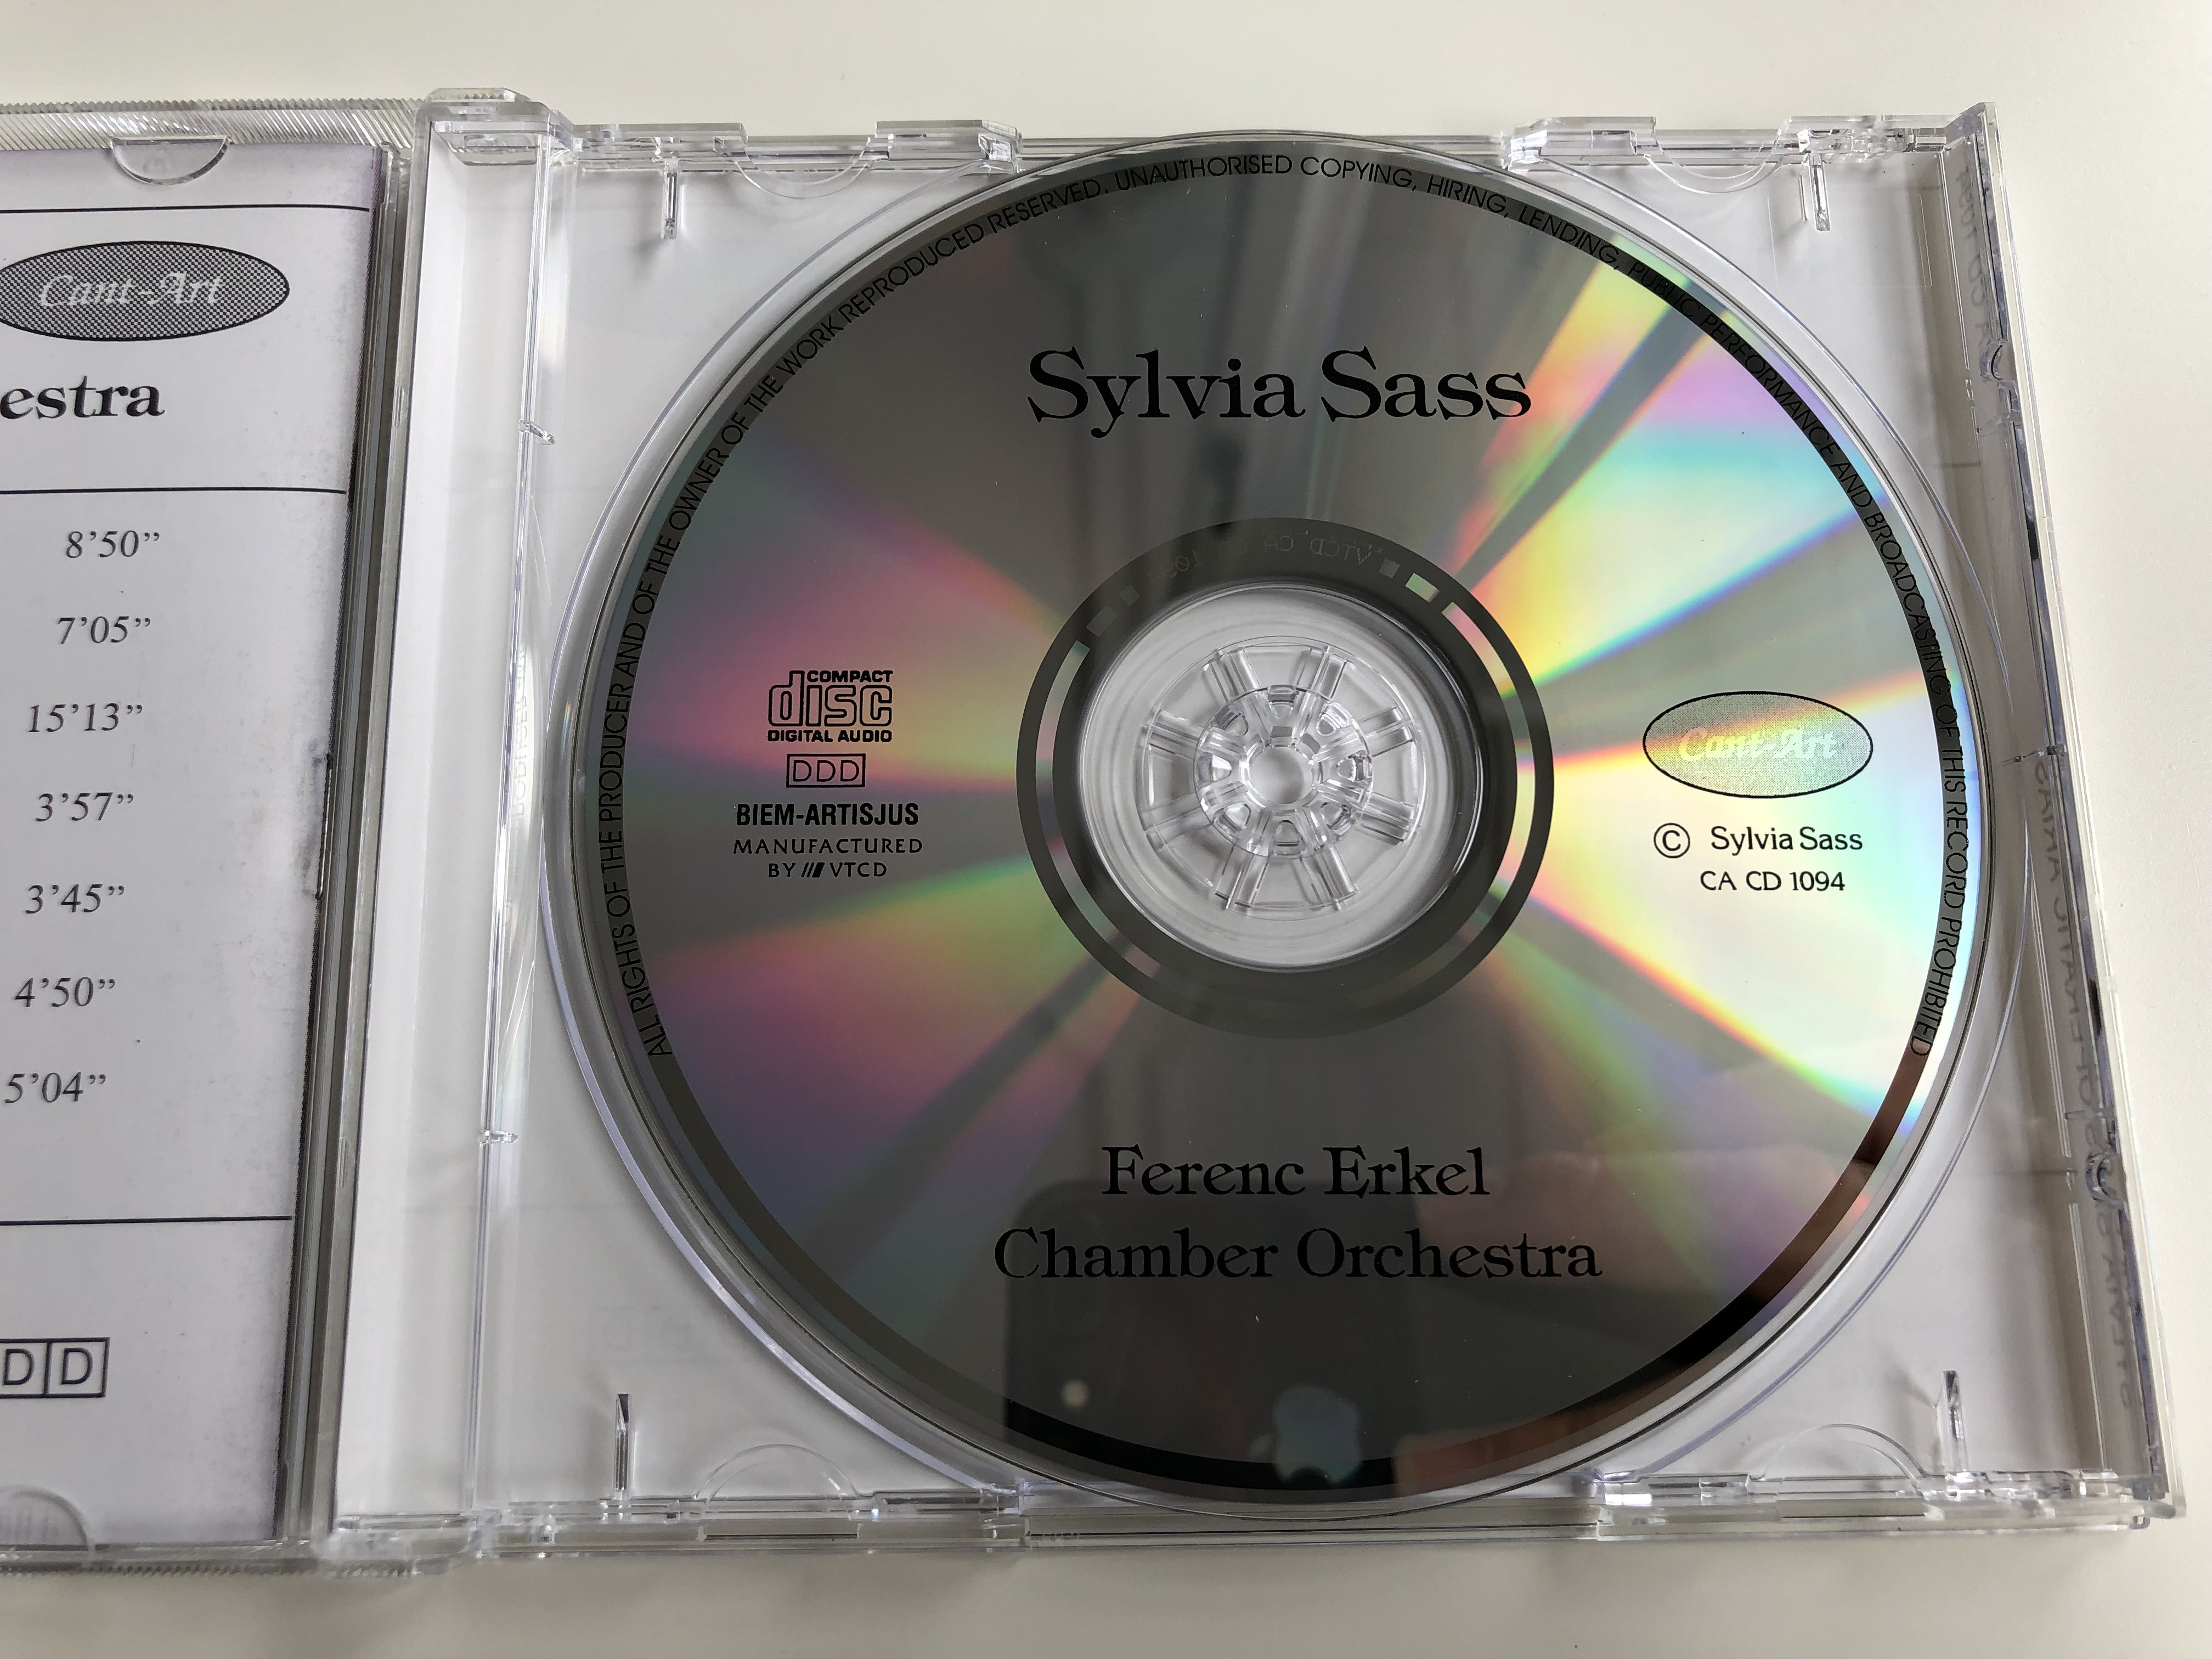 sylvia-sass-operatic-and-concert-arias-ferenc-erkel-chamber-orchestra-cant-art-audio-cd-1994-ca-cd-1094-8-.jpg